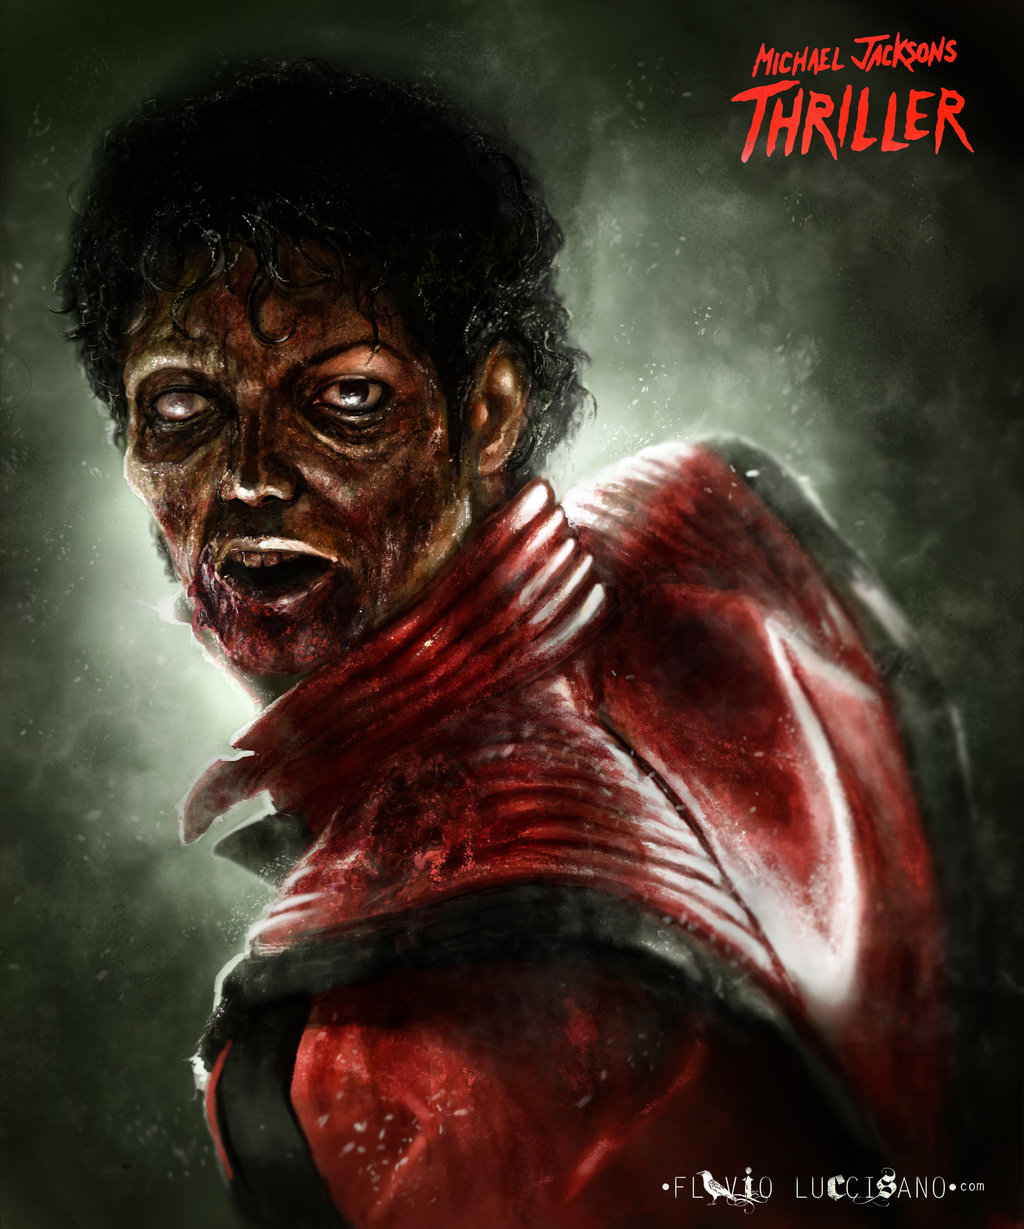 Michael Jackson S Thriller By Flavioluccisano